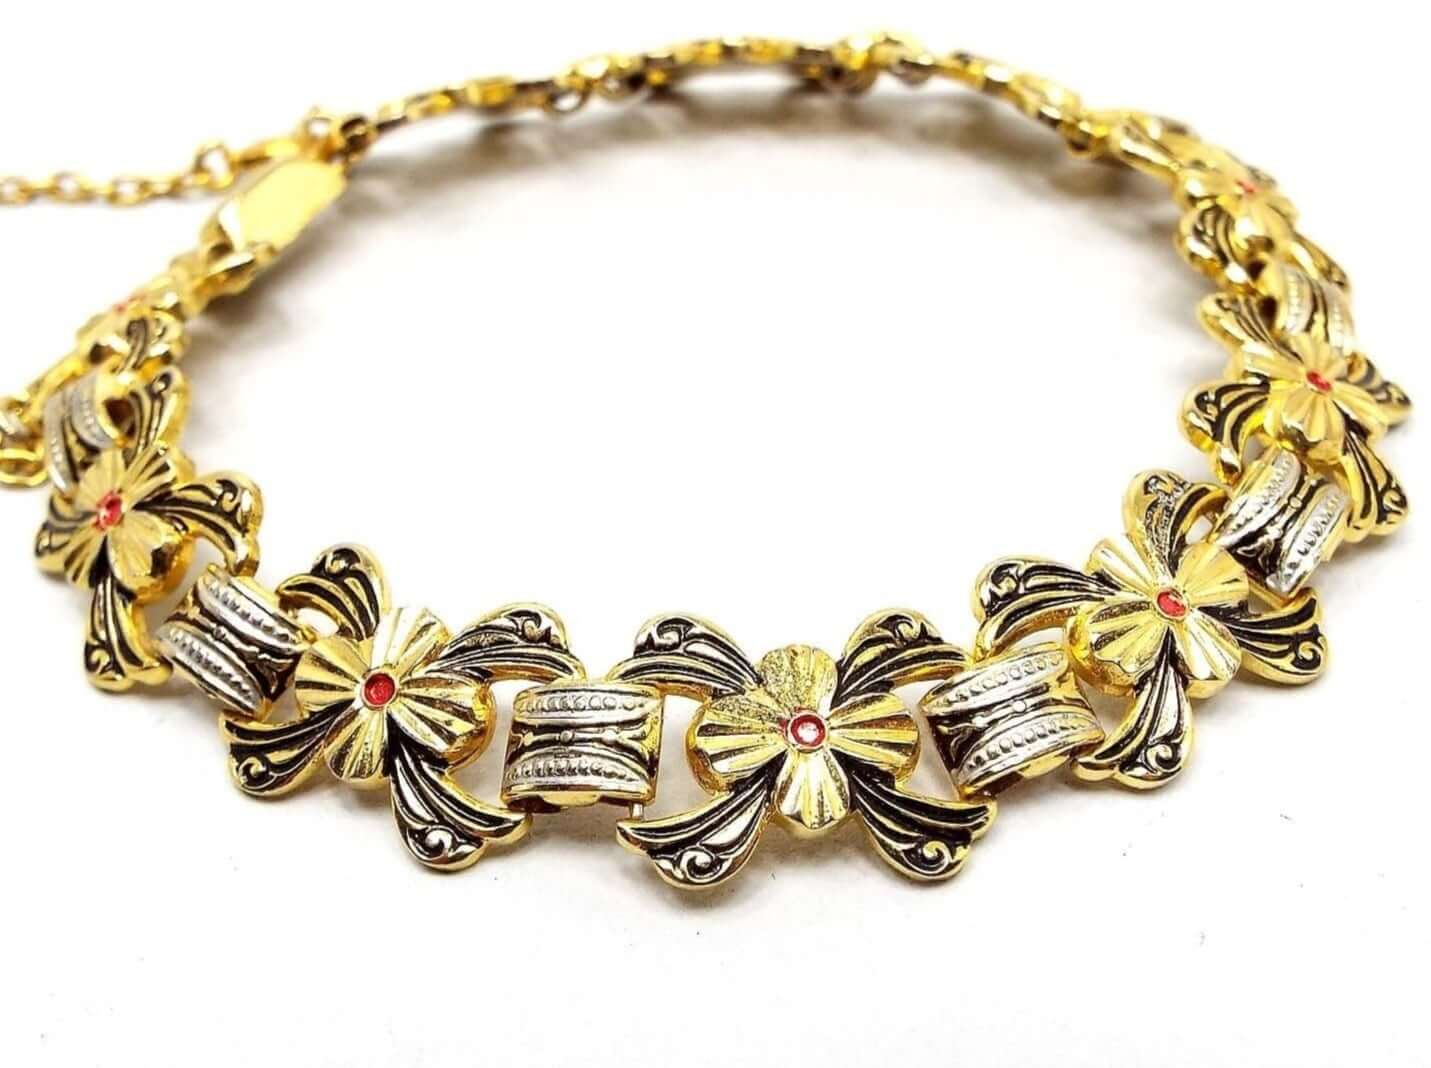 Top view of the retro vintage Damascene style link bracelet. Each link has a bow like design with textured gold tone that has black in the indented areas. In the middle is a flower with 4 petals and a red dot in the middle. Those links are connected by domed rectangle links with a dot pattern. The domed links have silver tone color metal on the sides and the rest is gold tone. At the end of the bracelet is a box clasp and a thin safety chain near the clasp area that has a round spring ring clasp.